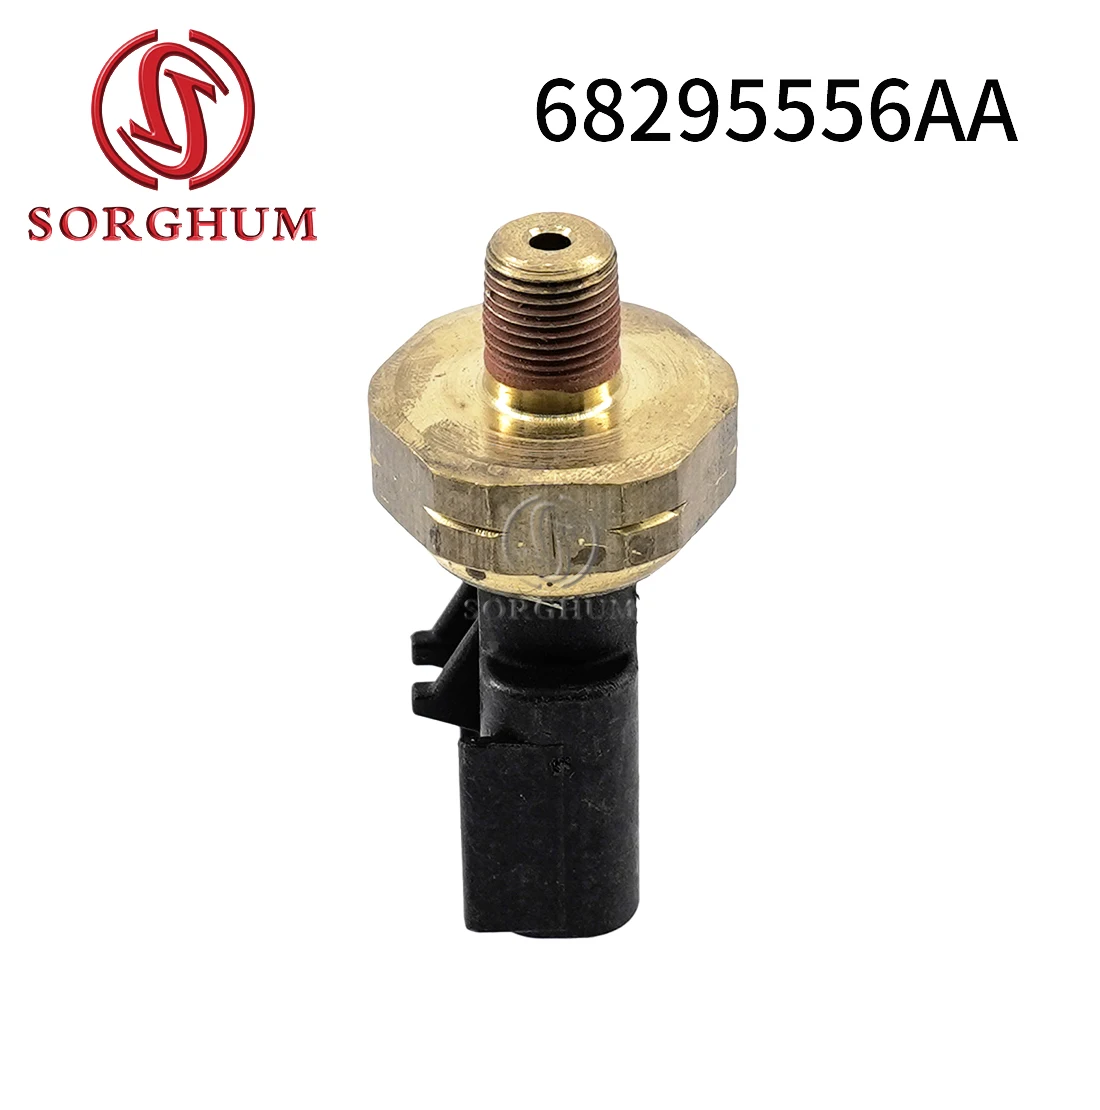 

SORGHUM 68295556AA For Jeep Grand Cherokee Ram Master 3500 Chrysler Pacifica Dodge Charger 3.6L Auto Engine Oil Pressure Sensor